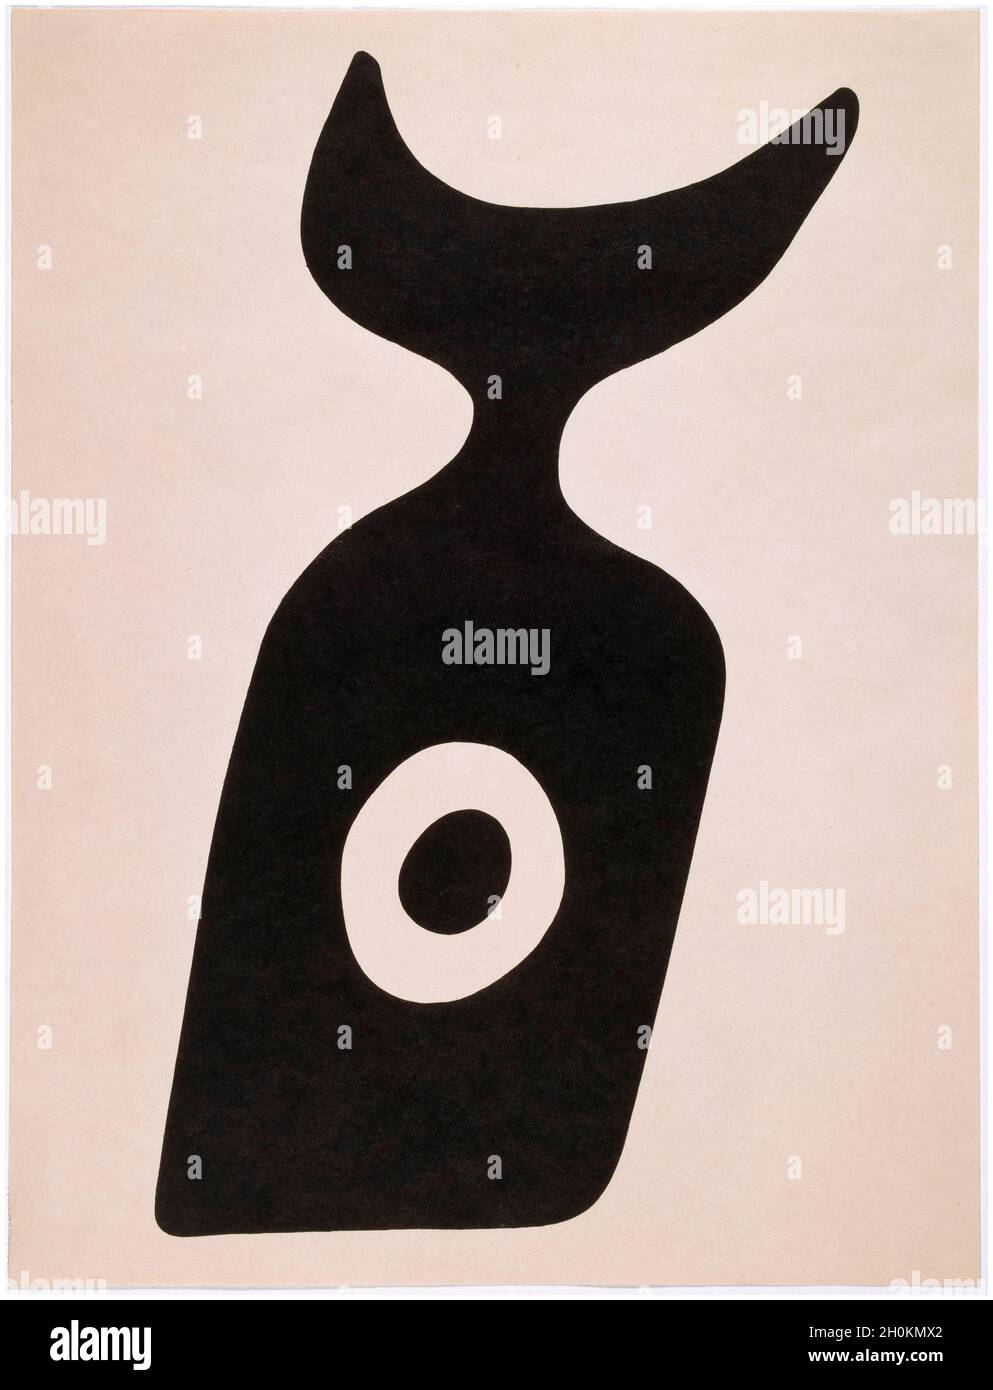 Kurt Schwitters, Jean Arp, The Navel Bottle, lithographic print, 1923 Stock  Photo - Alamy